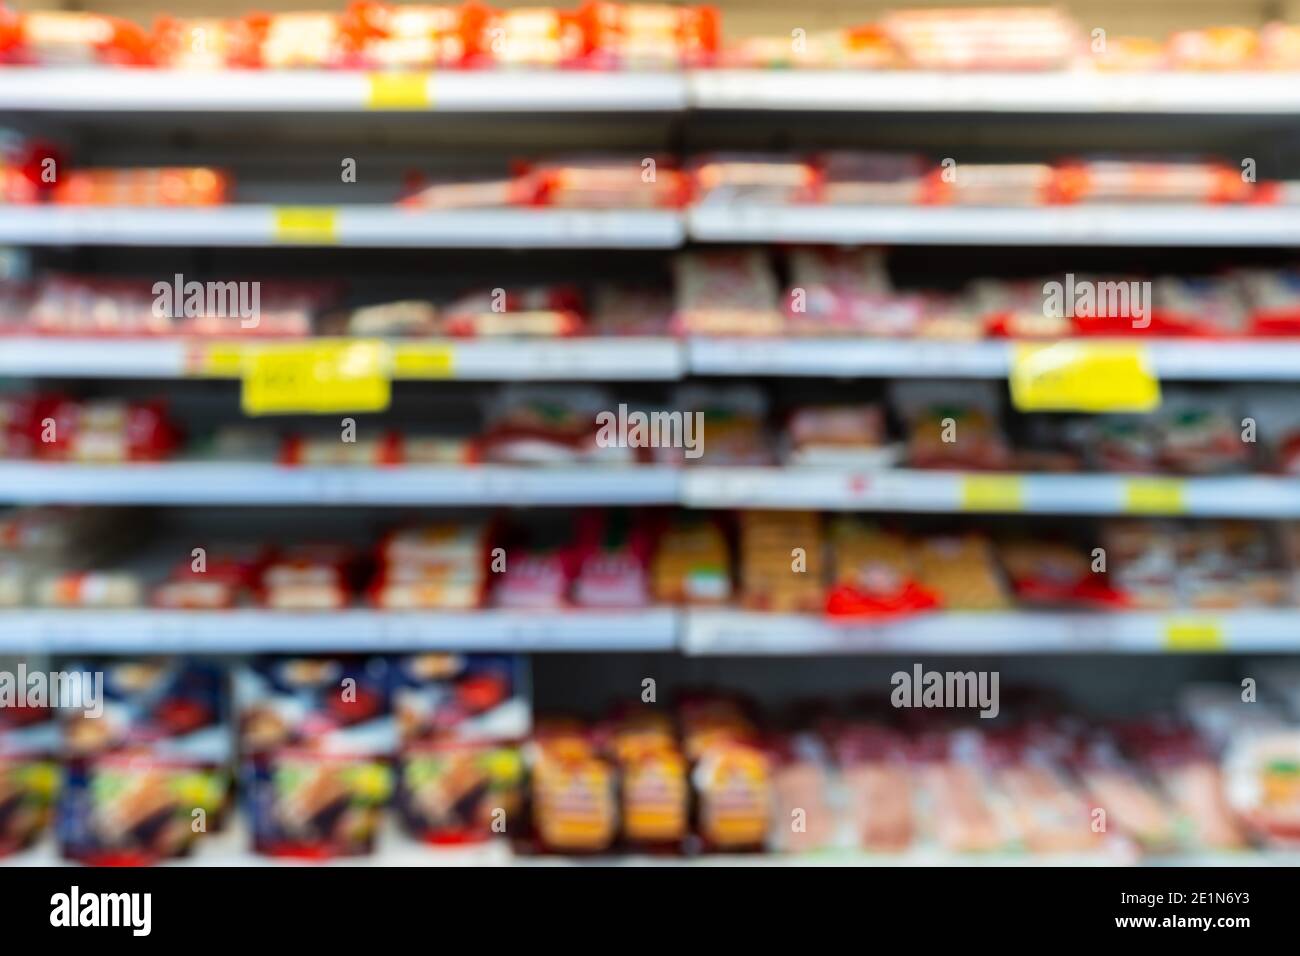 Blur image of shelf with consumer product shop in supermarket Stock Photo